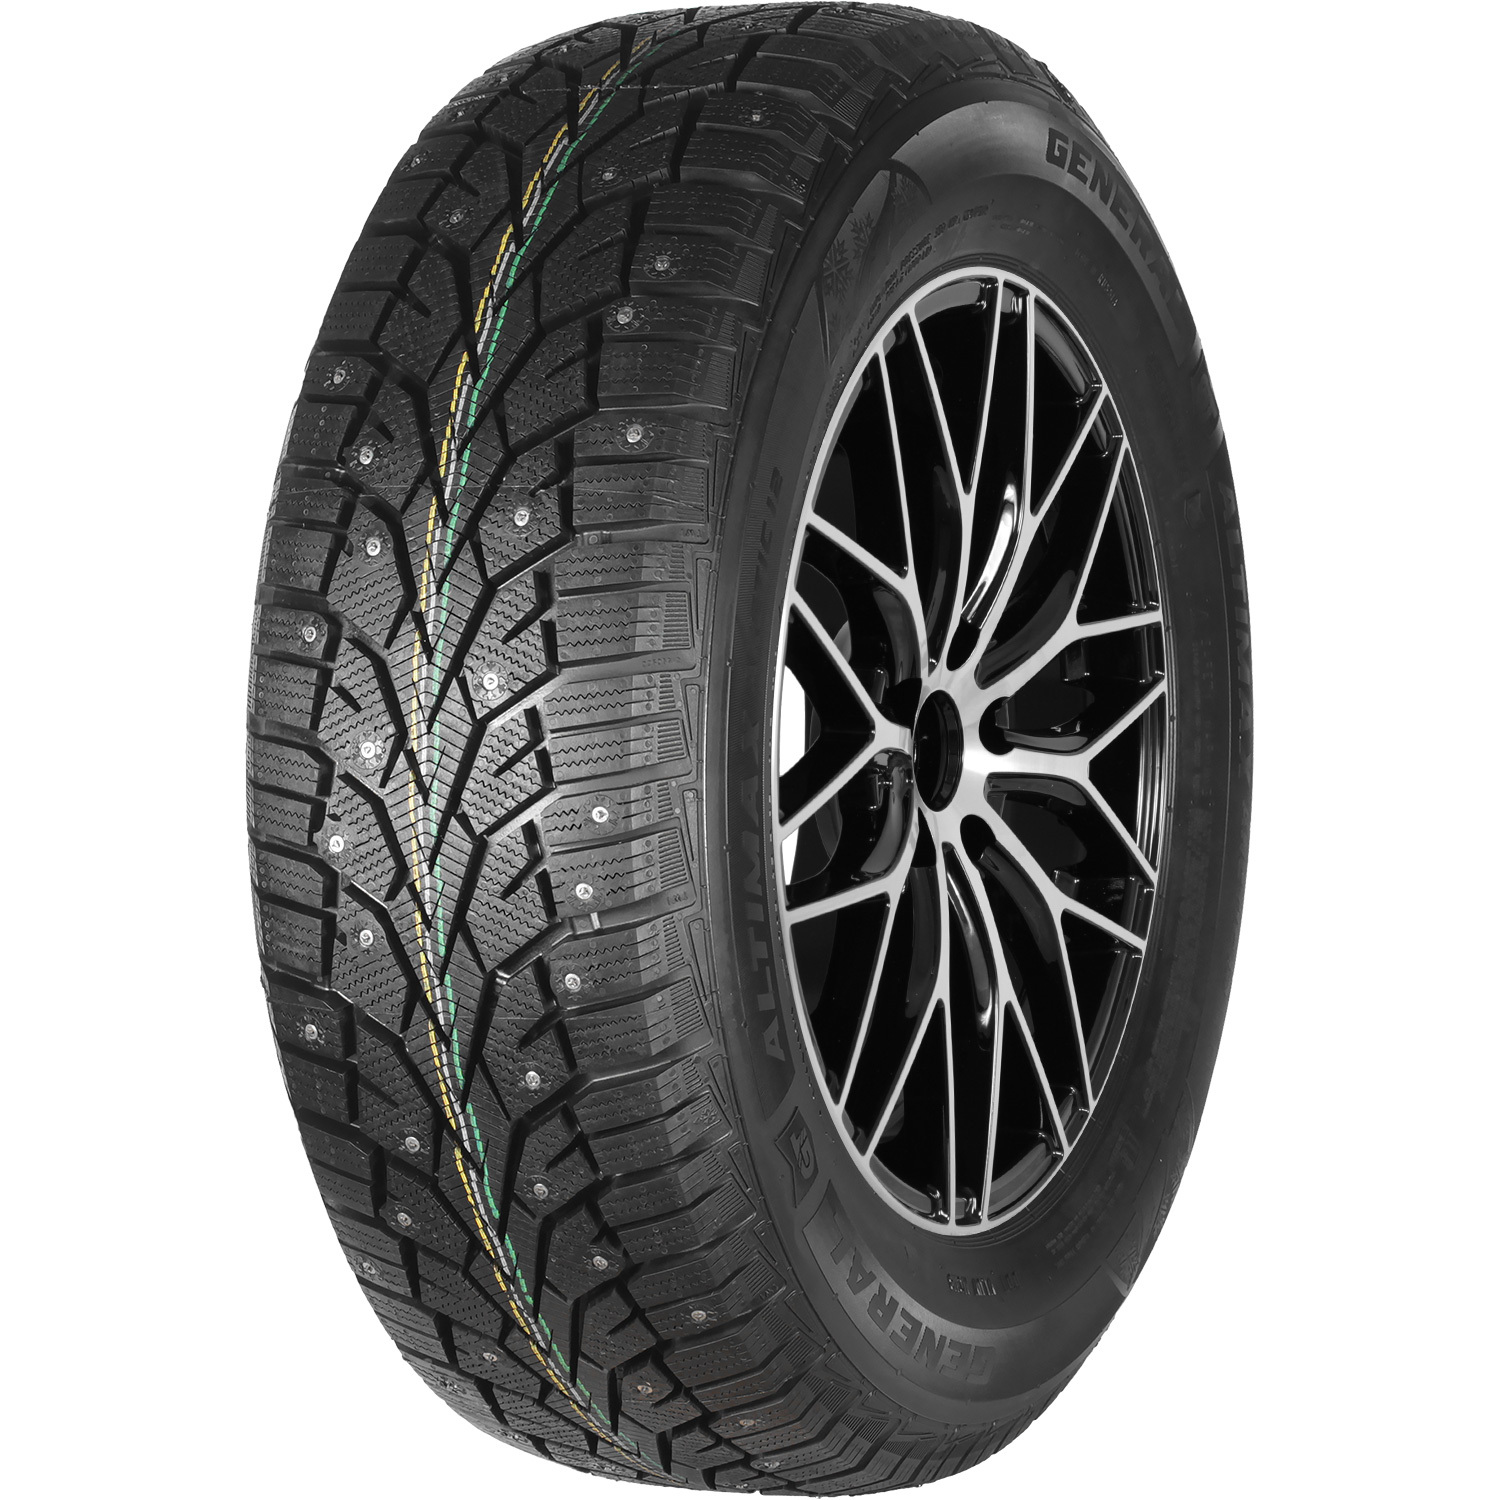 Автомобильная шина General Tire Altimax Arctic 12 215/60 R16 99T Шипованные tire cover central old glory us flag american flag spare tire cover select tire size back up camera in menu